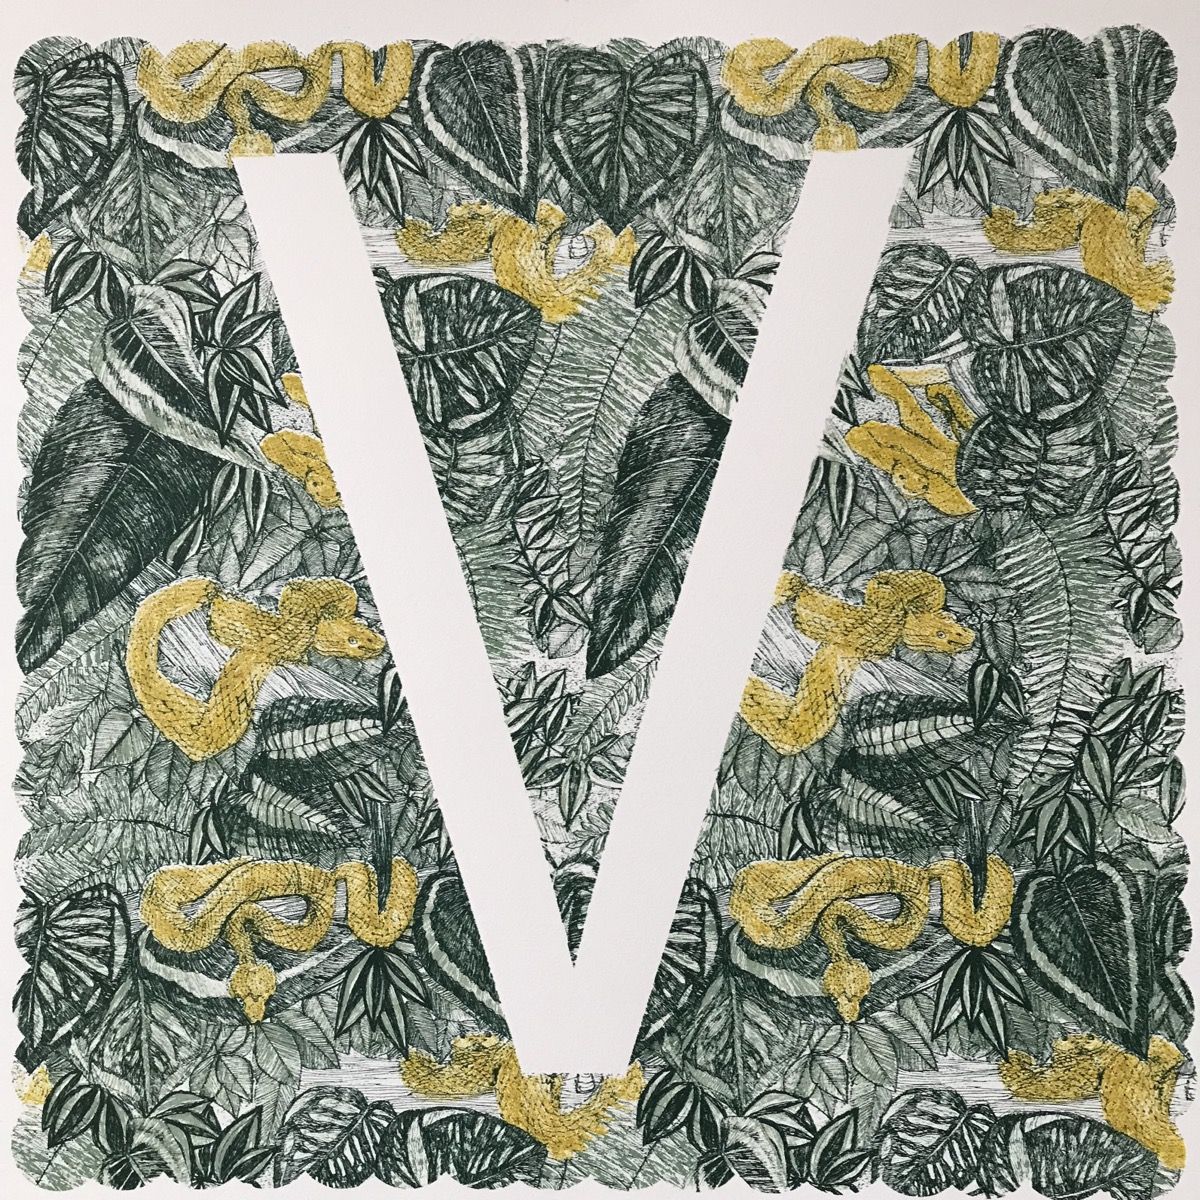 V is for Viper (large) by Clare Halifax